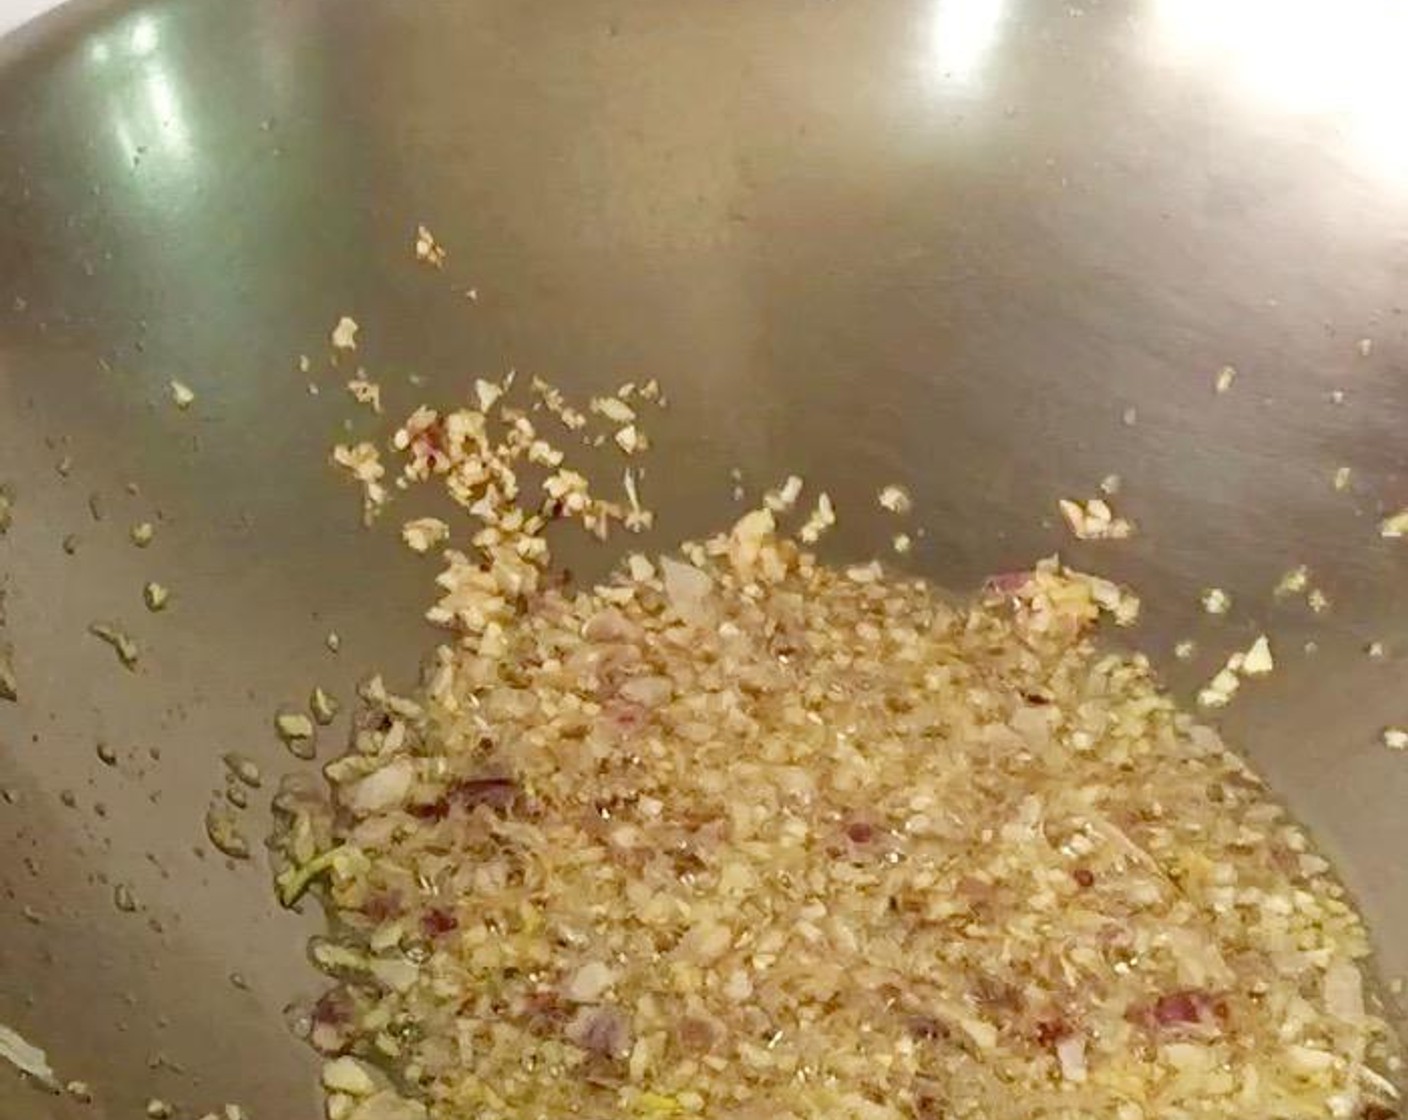 step 4 Heat a wok with Vegetable Oil (1/4 cup) over medium-high heat. Add chopped garlic and shallots and saute until fragrant.